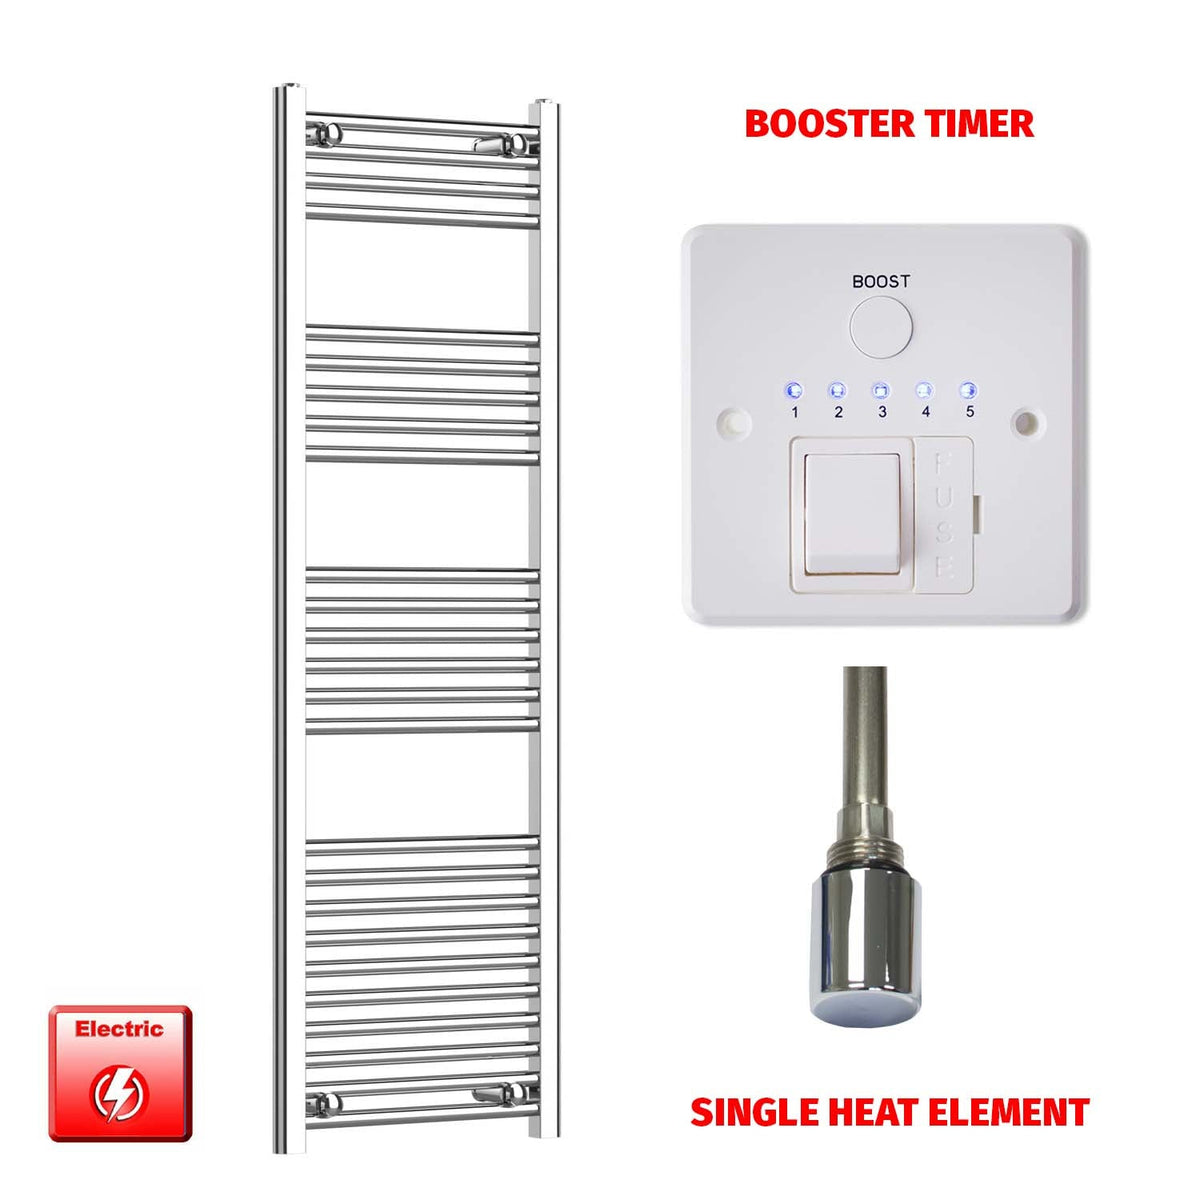 1400mm High 450mm Wide Pre-Filled Electric Heated Towel Radiator Straight Chrome Single heat element Booster timer